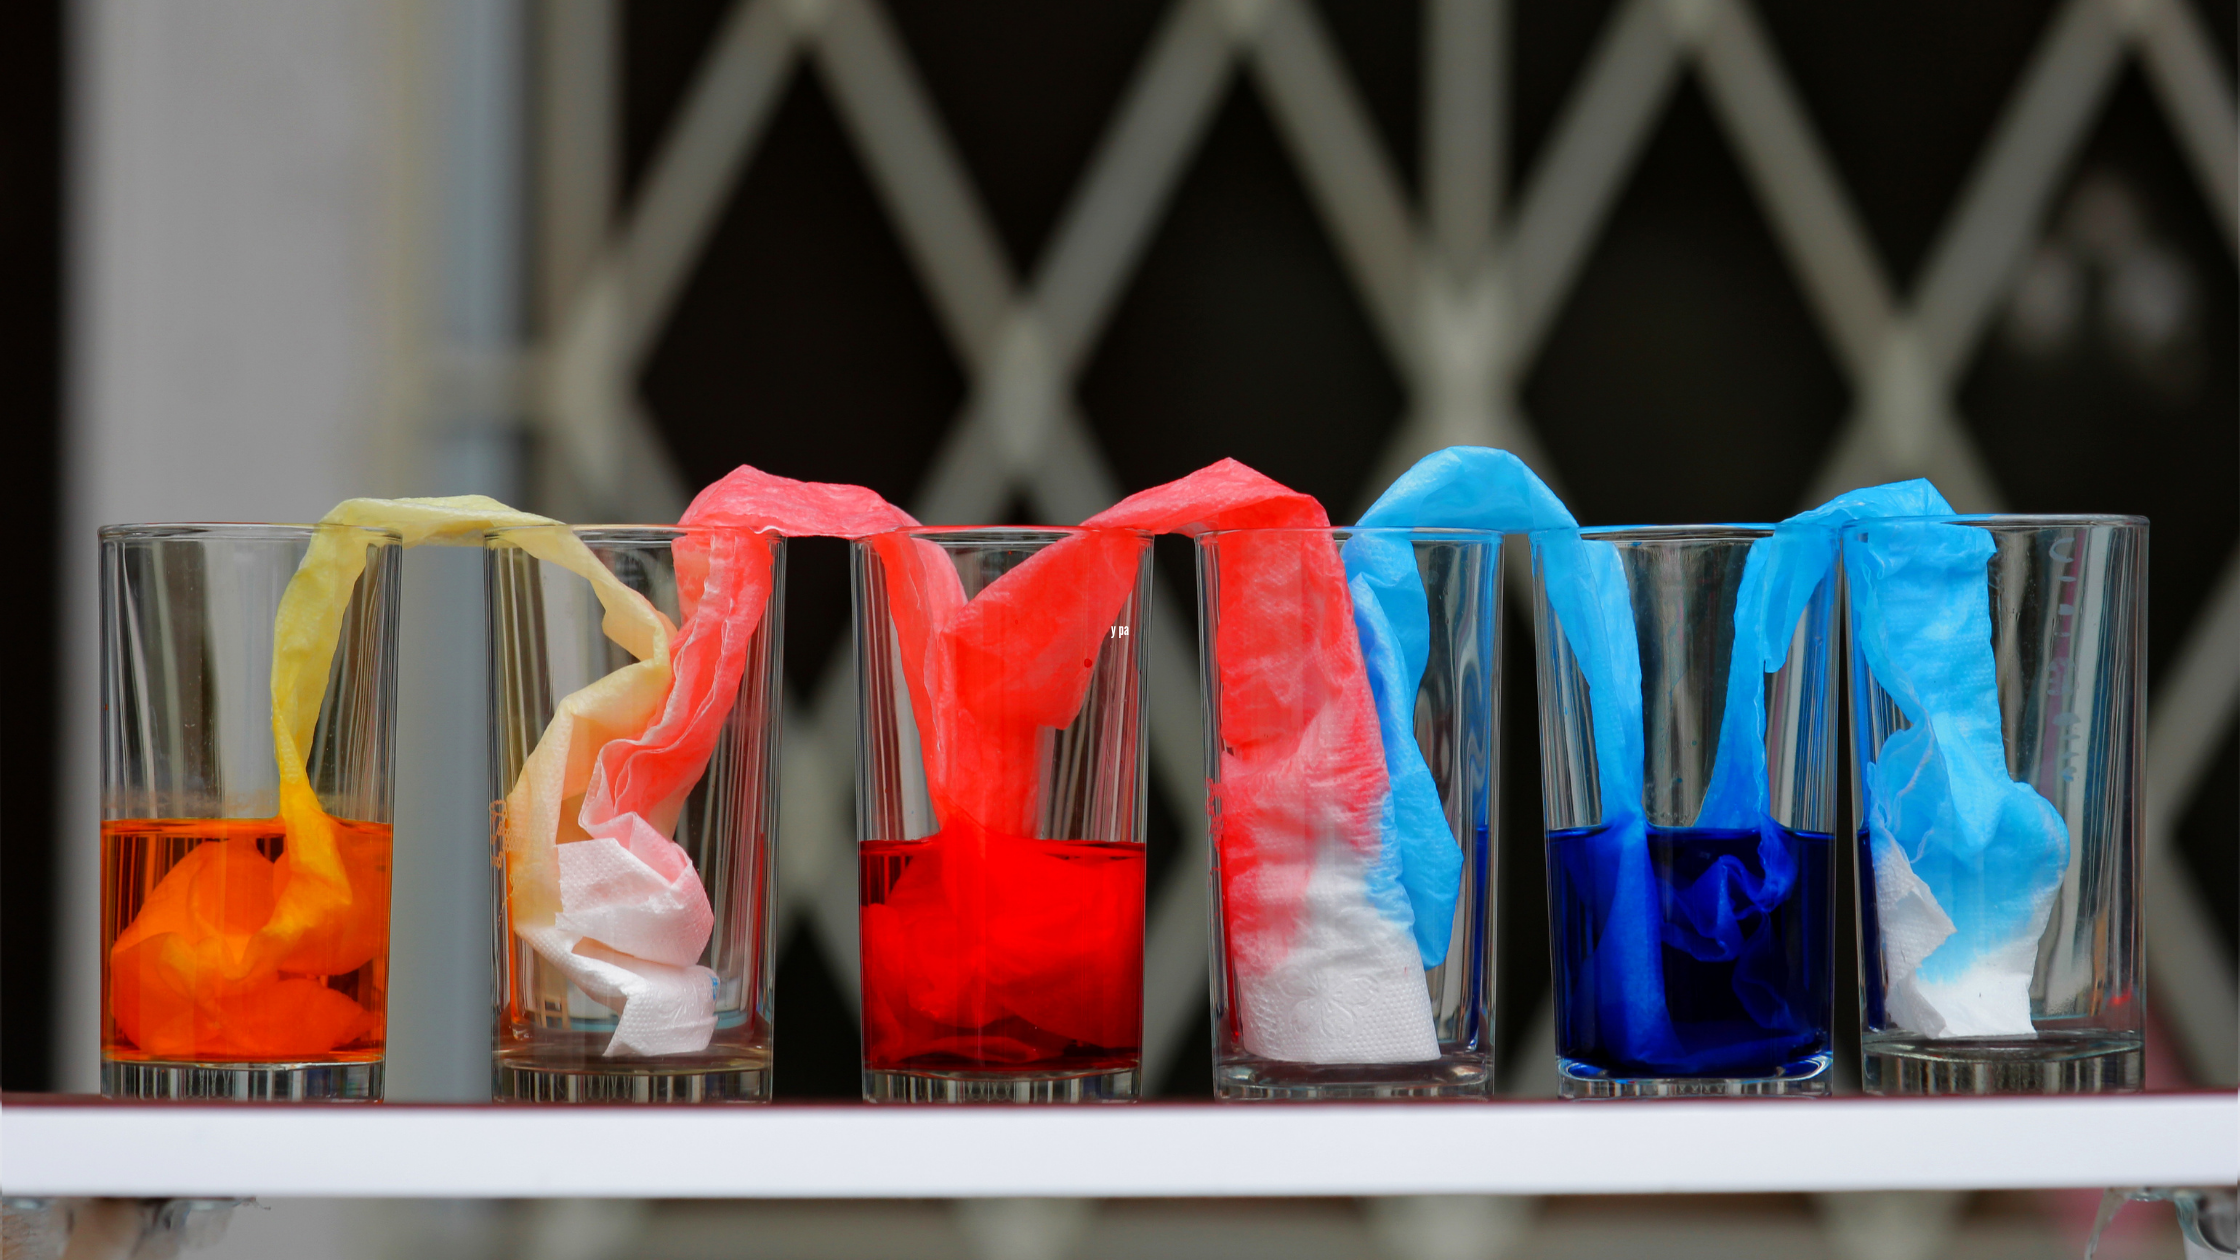 5 Fun & Cool Science Activities with Dye to Do With the Kids 50